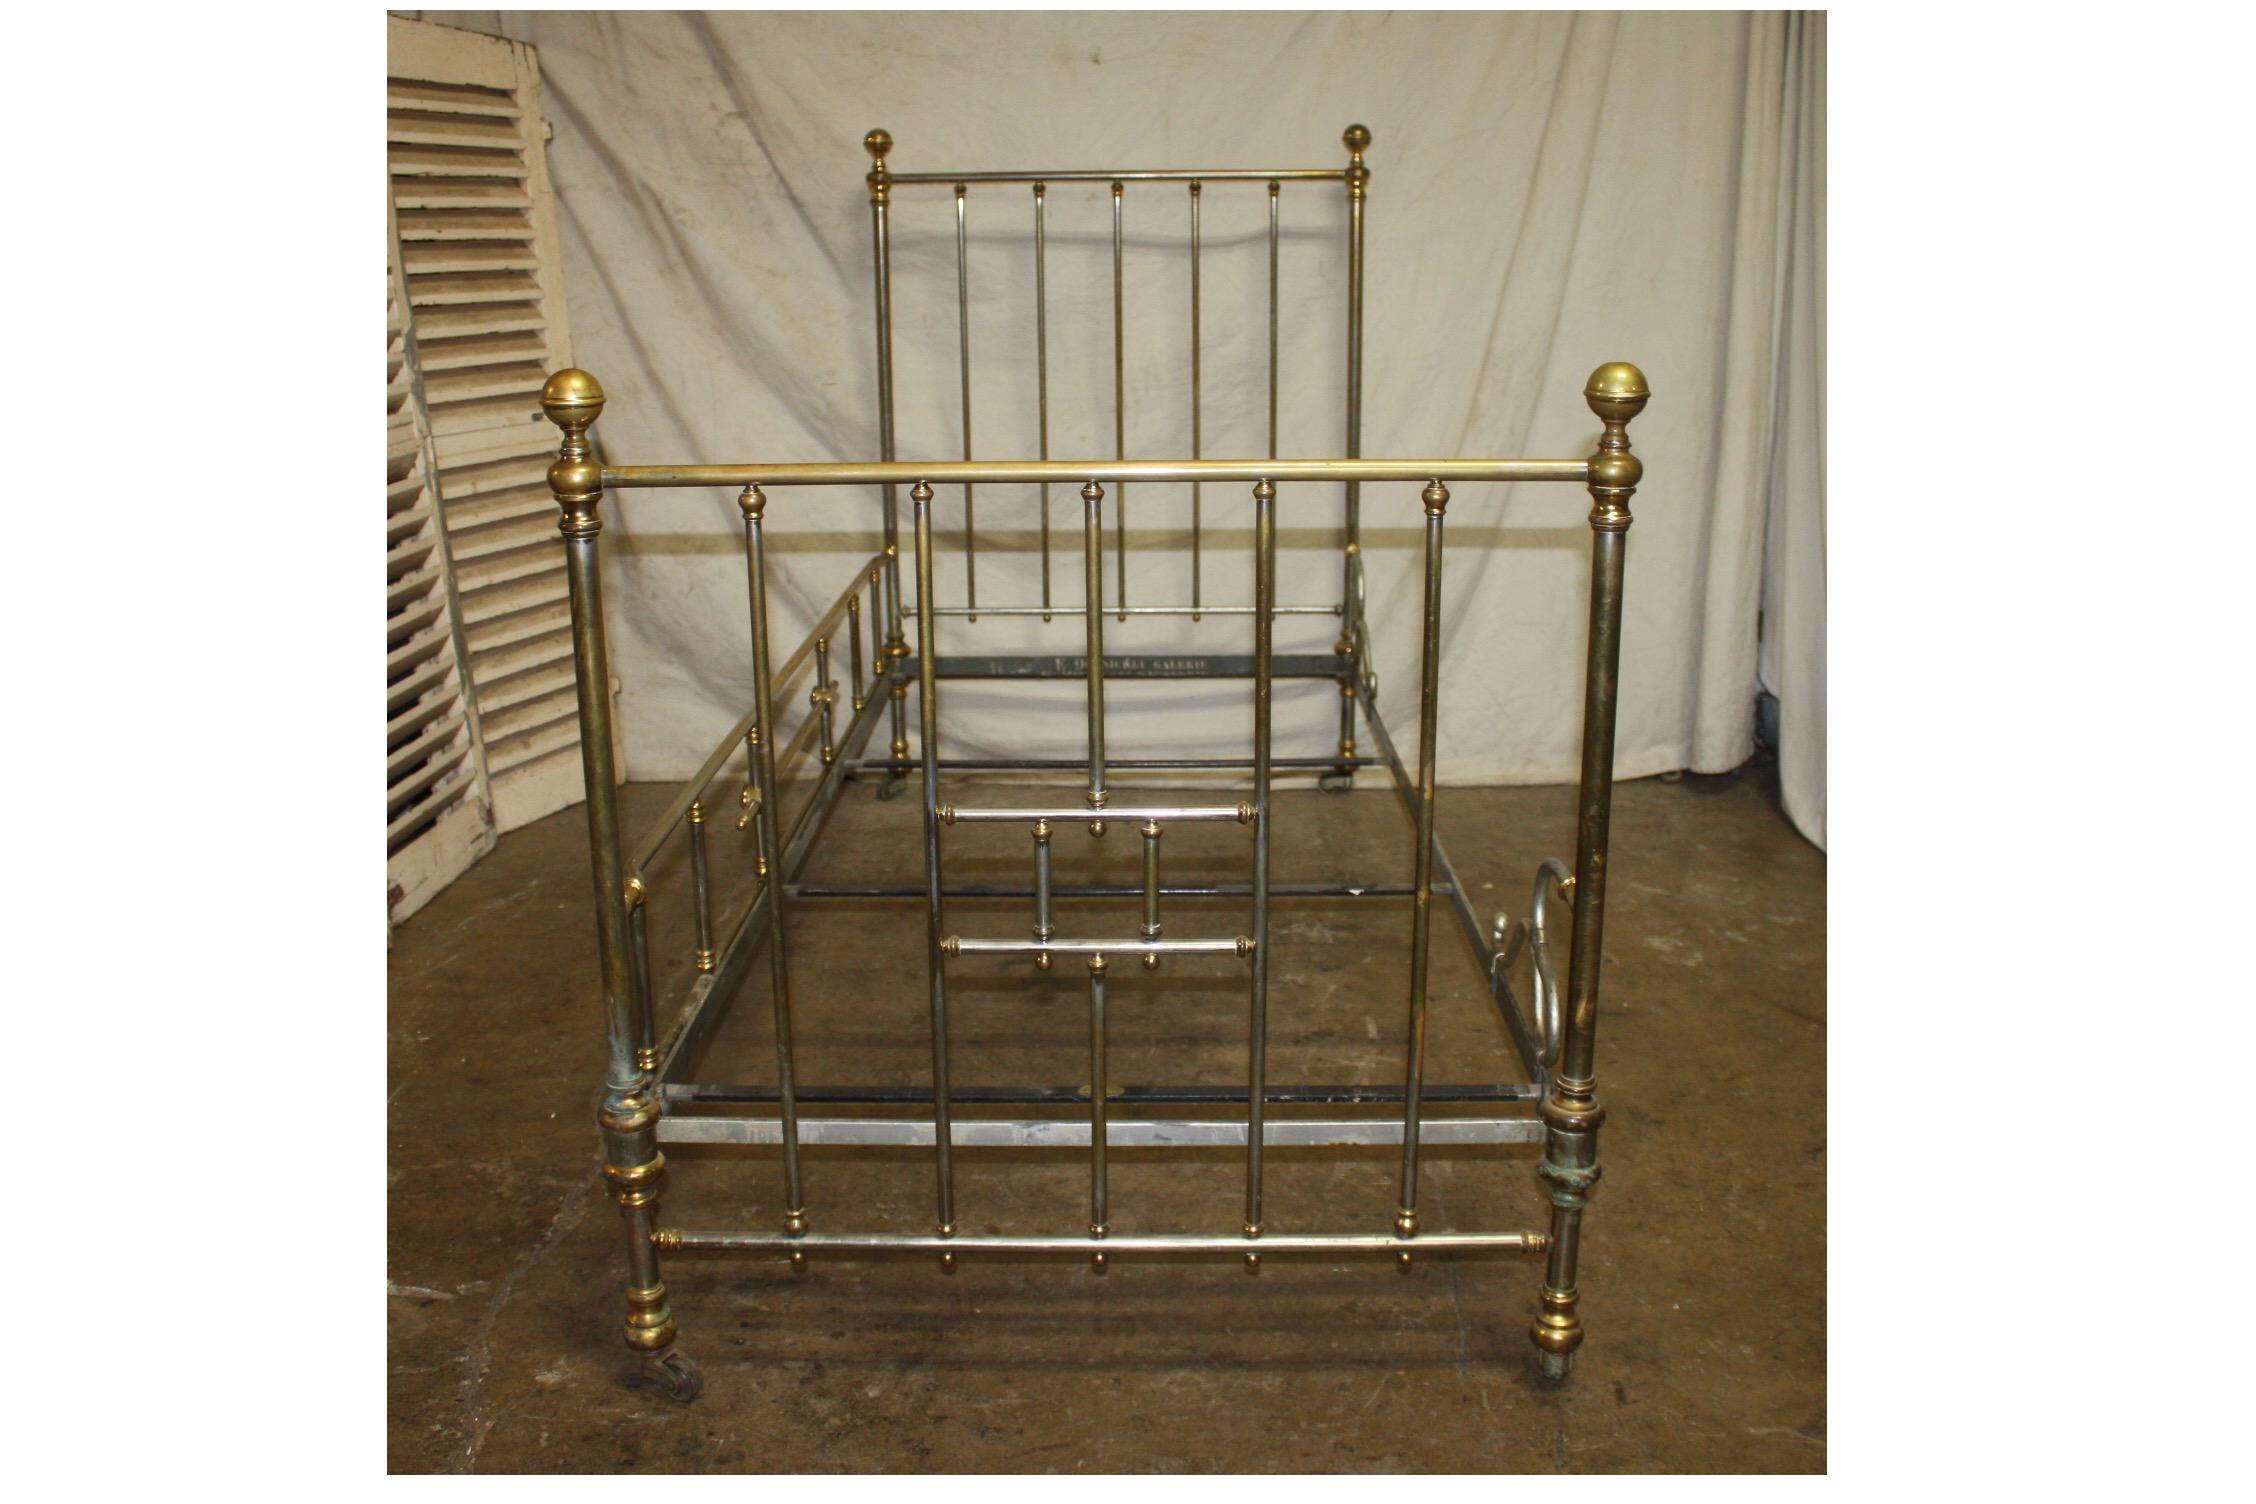 Early 20th century iron bed
Dimension of the front is 49